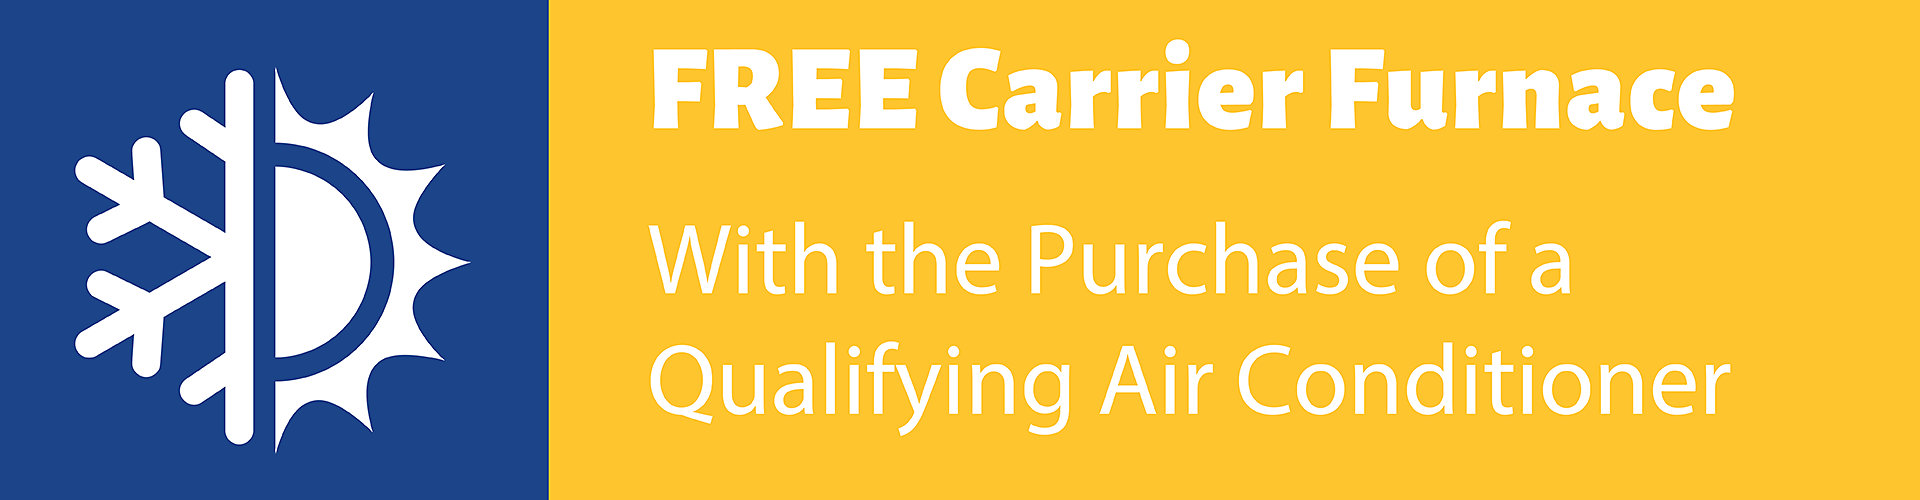 Free Carrier furnace with purchase of qualifying air conditioner.